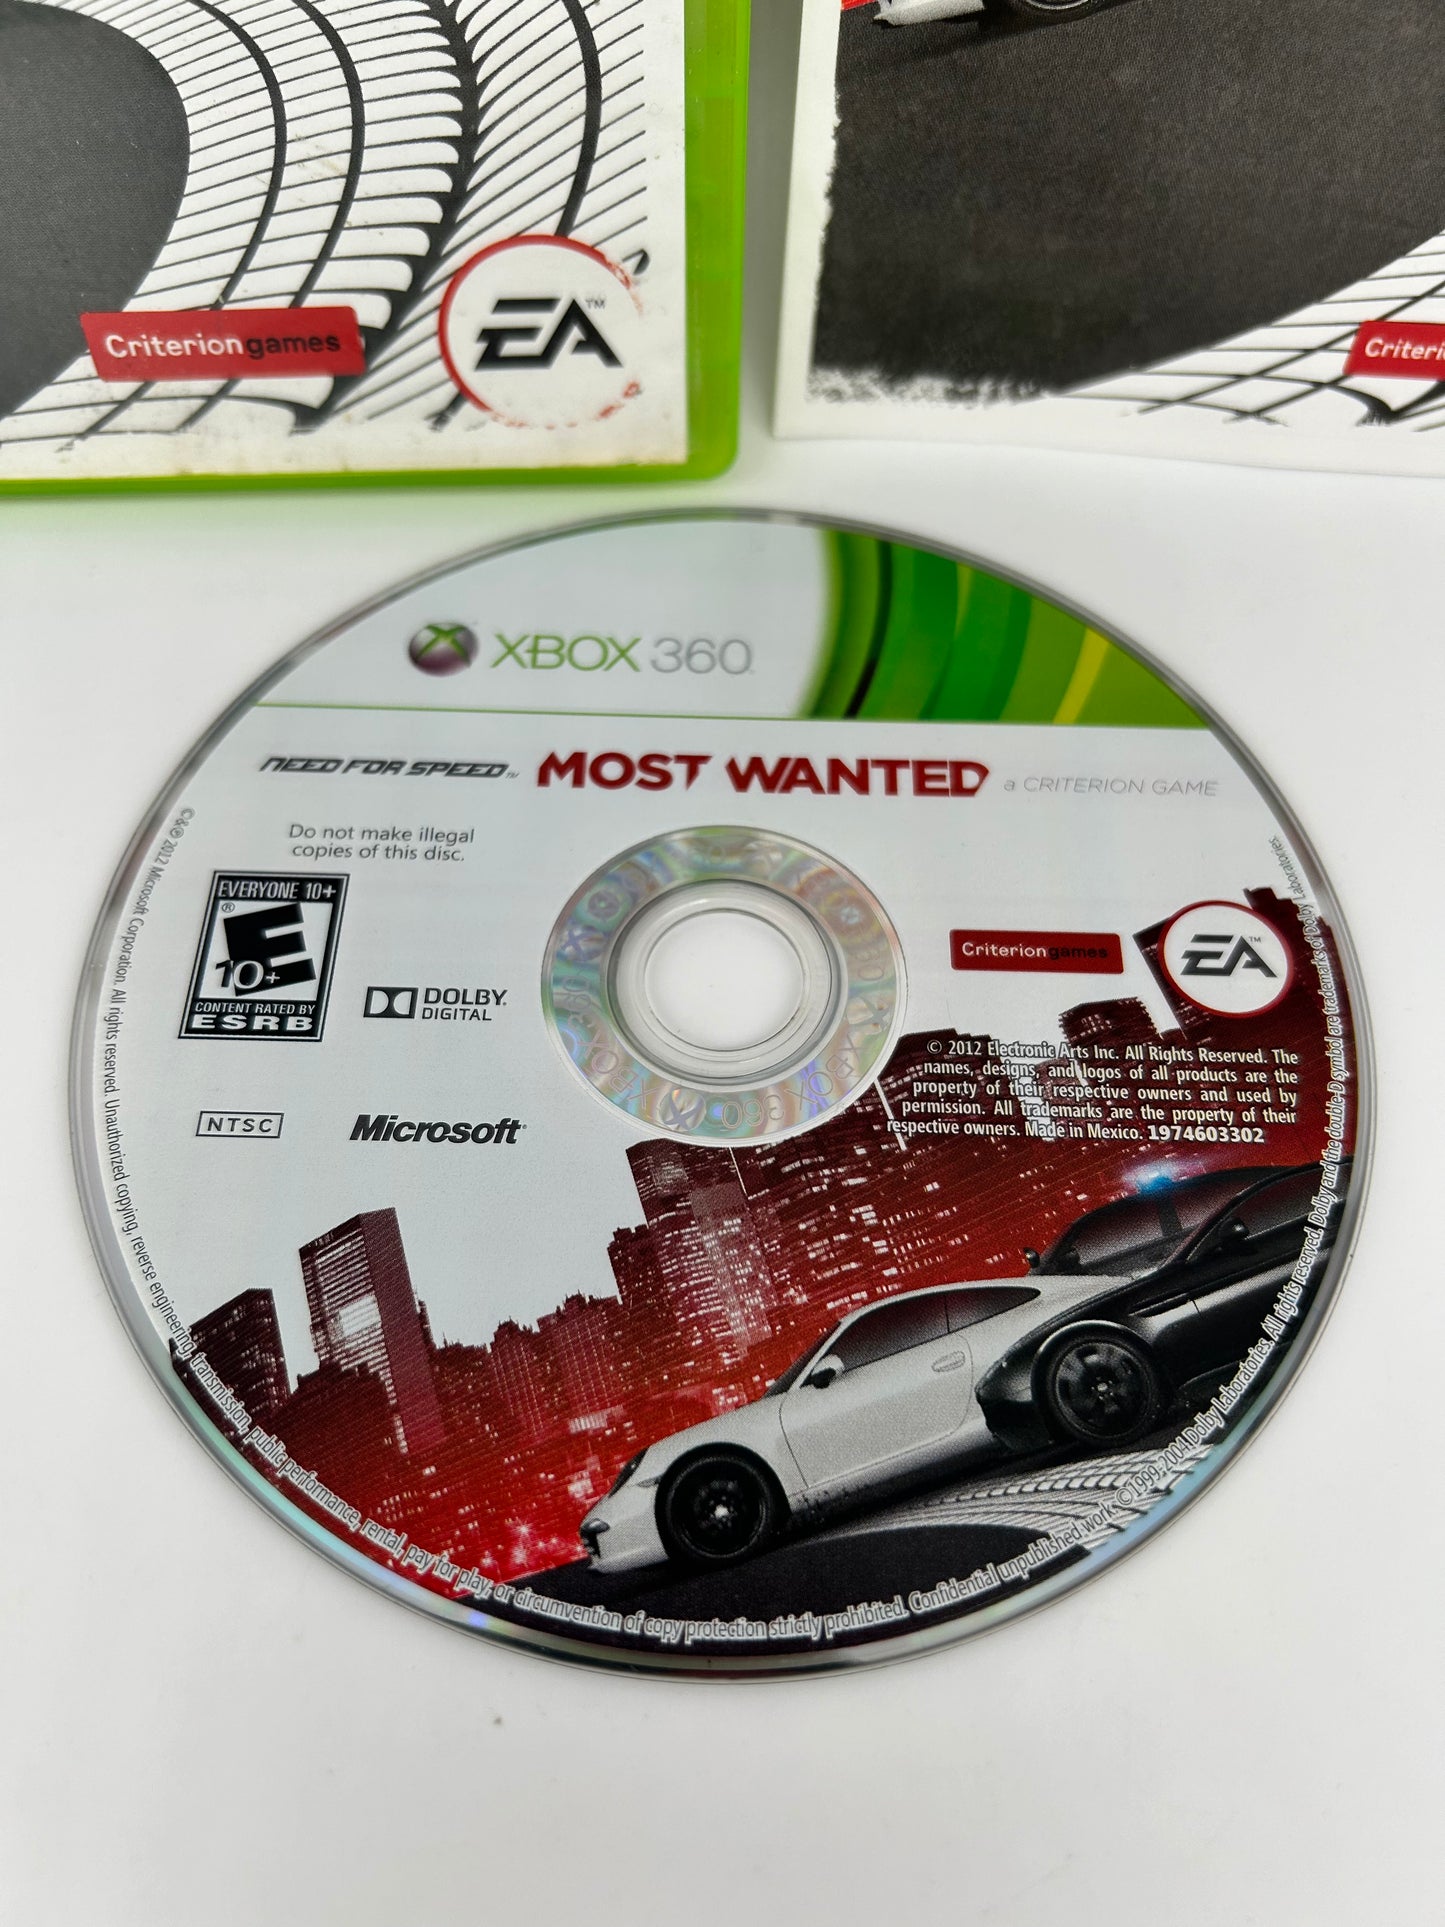 Microsoft XBOX 360 | NEED FOR SPEED MOST WANTED